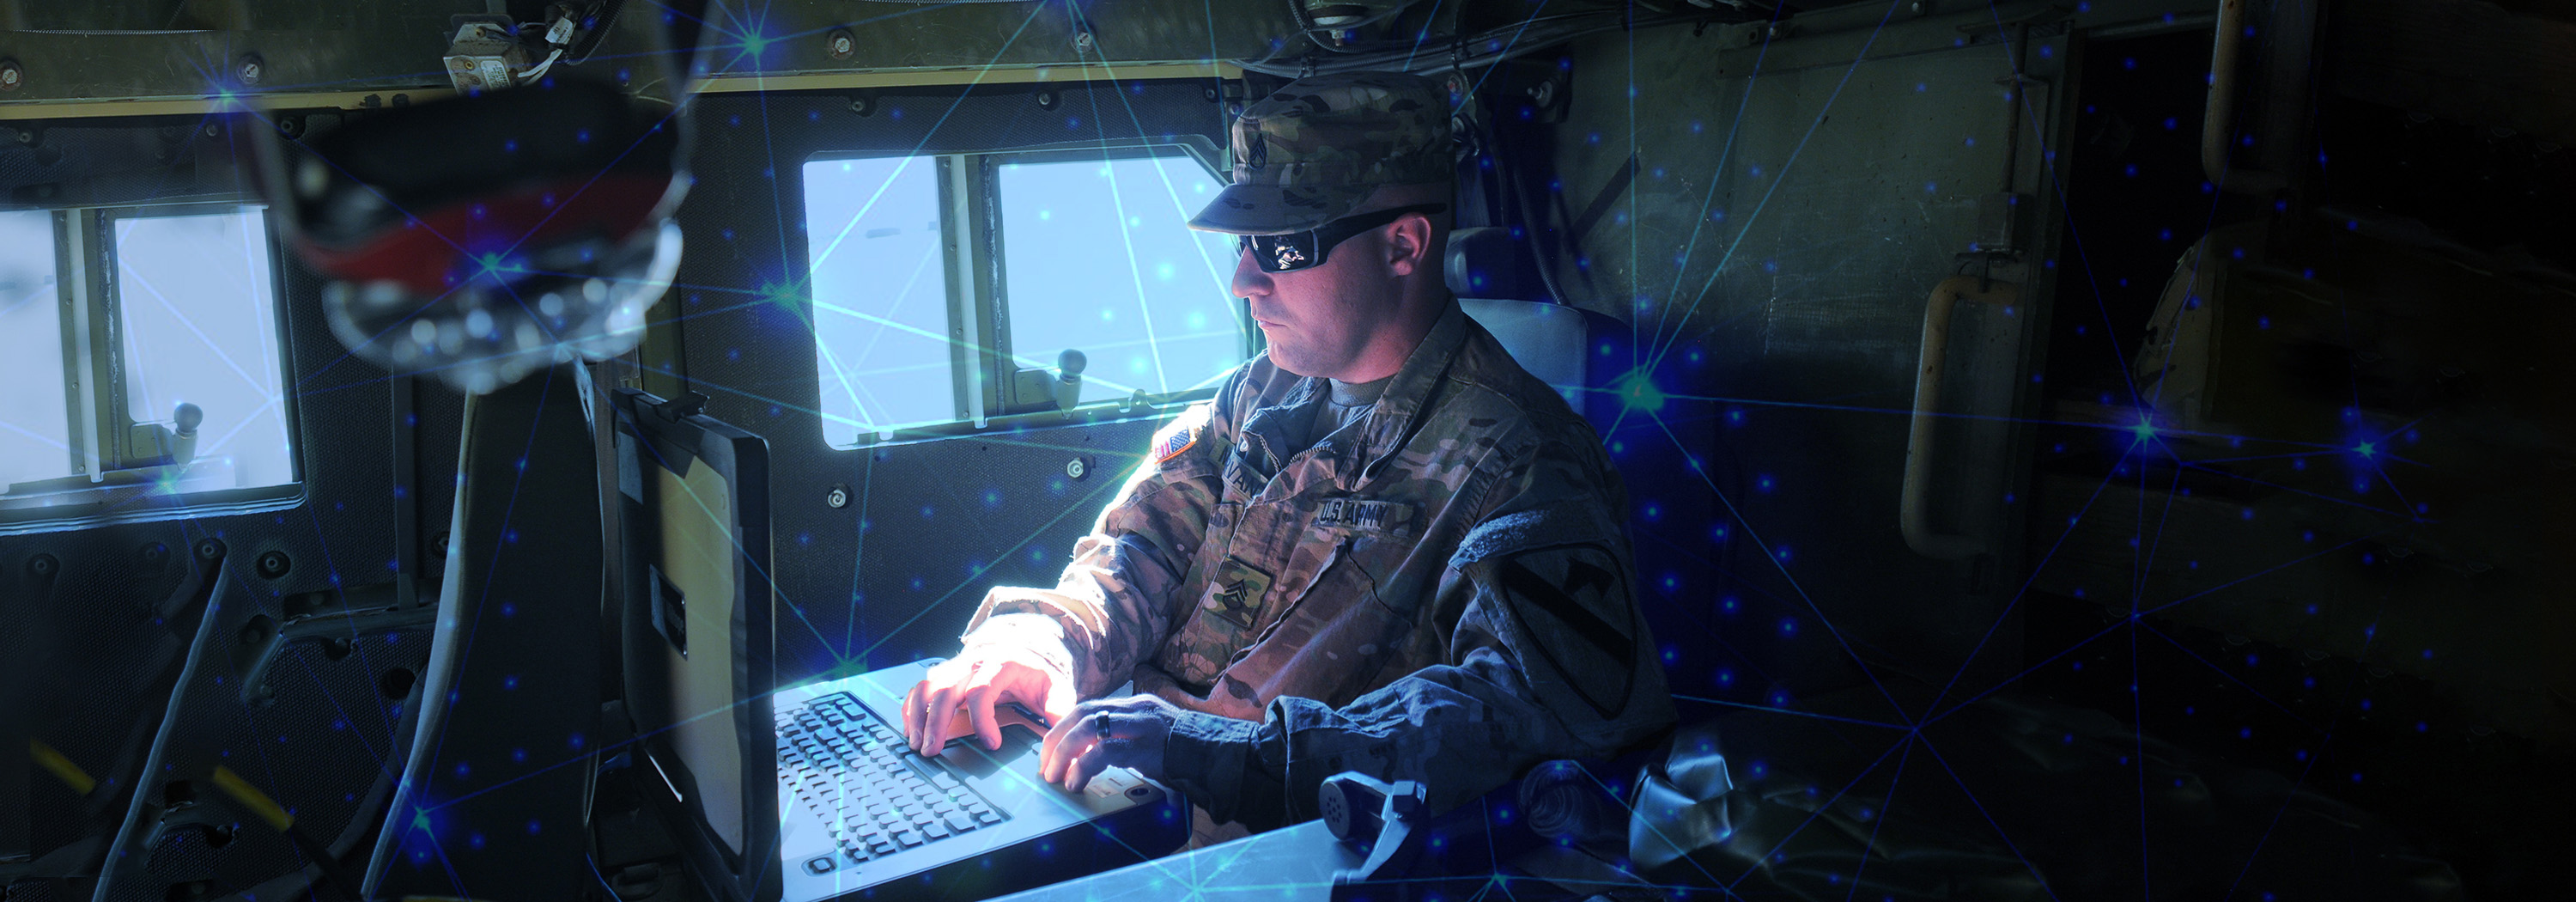 ECS Awarded $430M AESS Recompete by Army Cyber Command